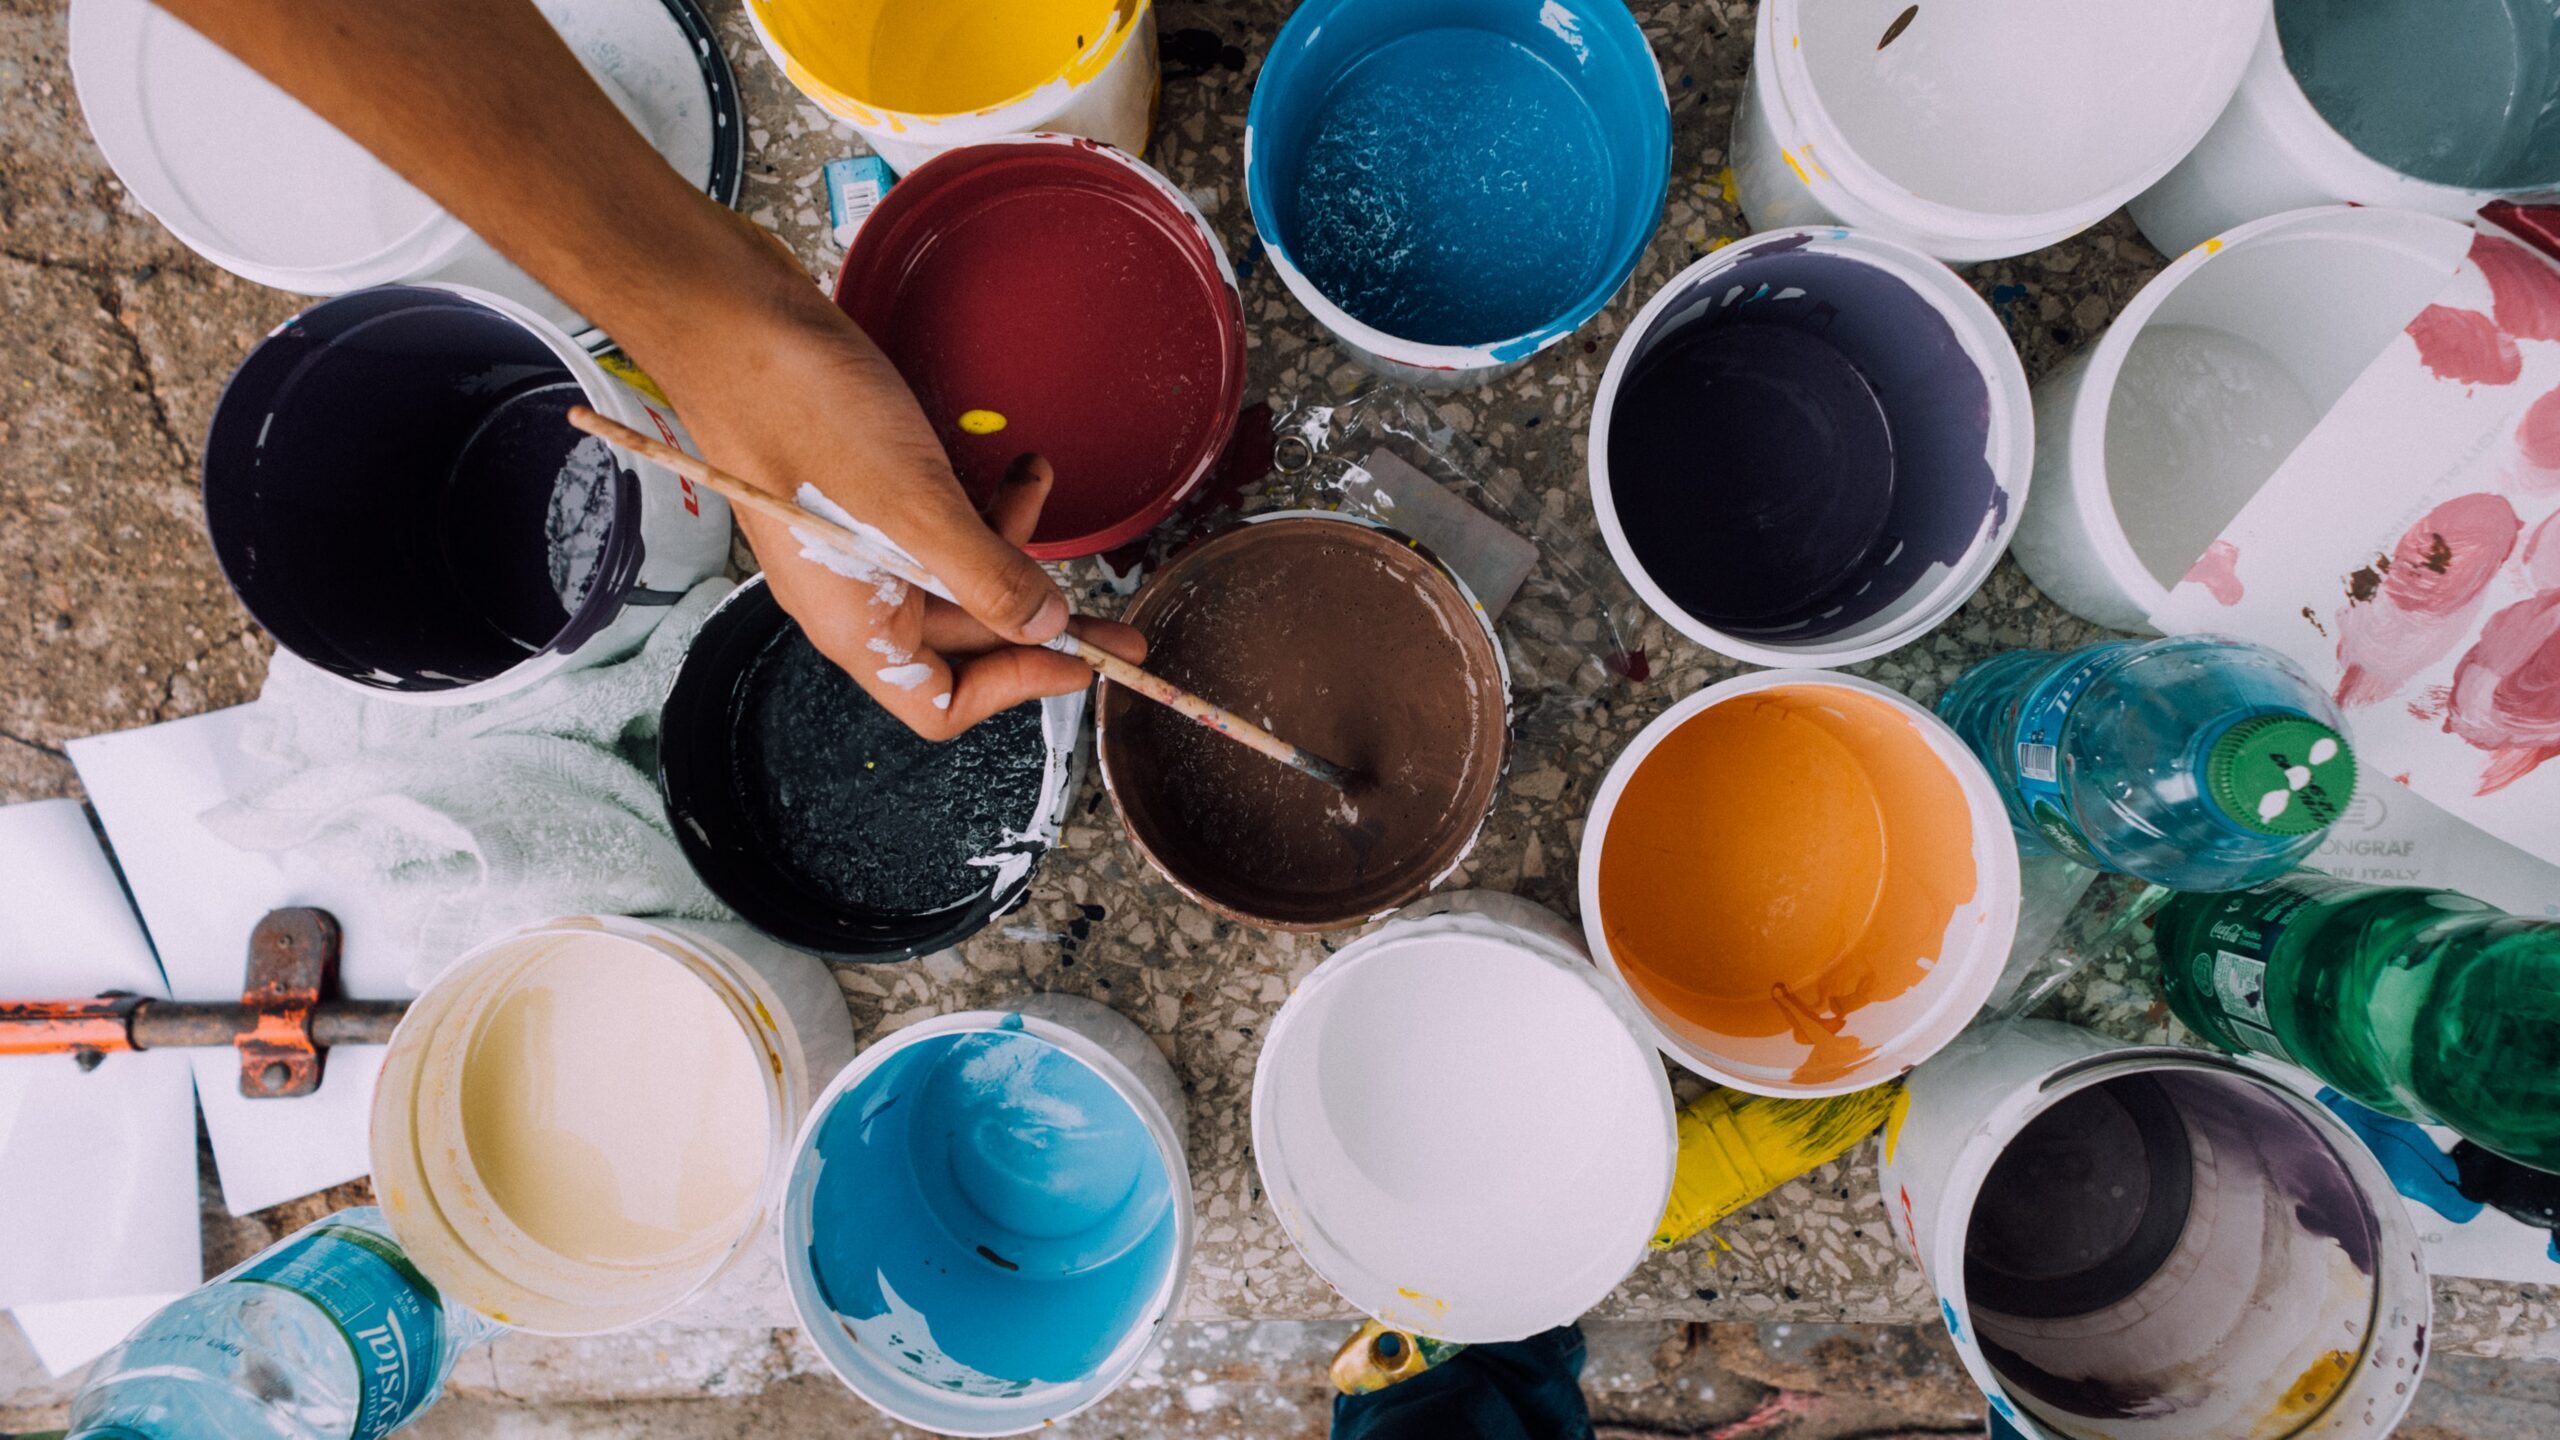 How to start a painting business? A complete guide for starting a business.